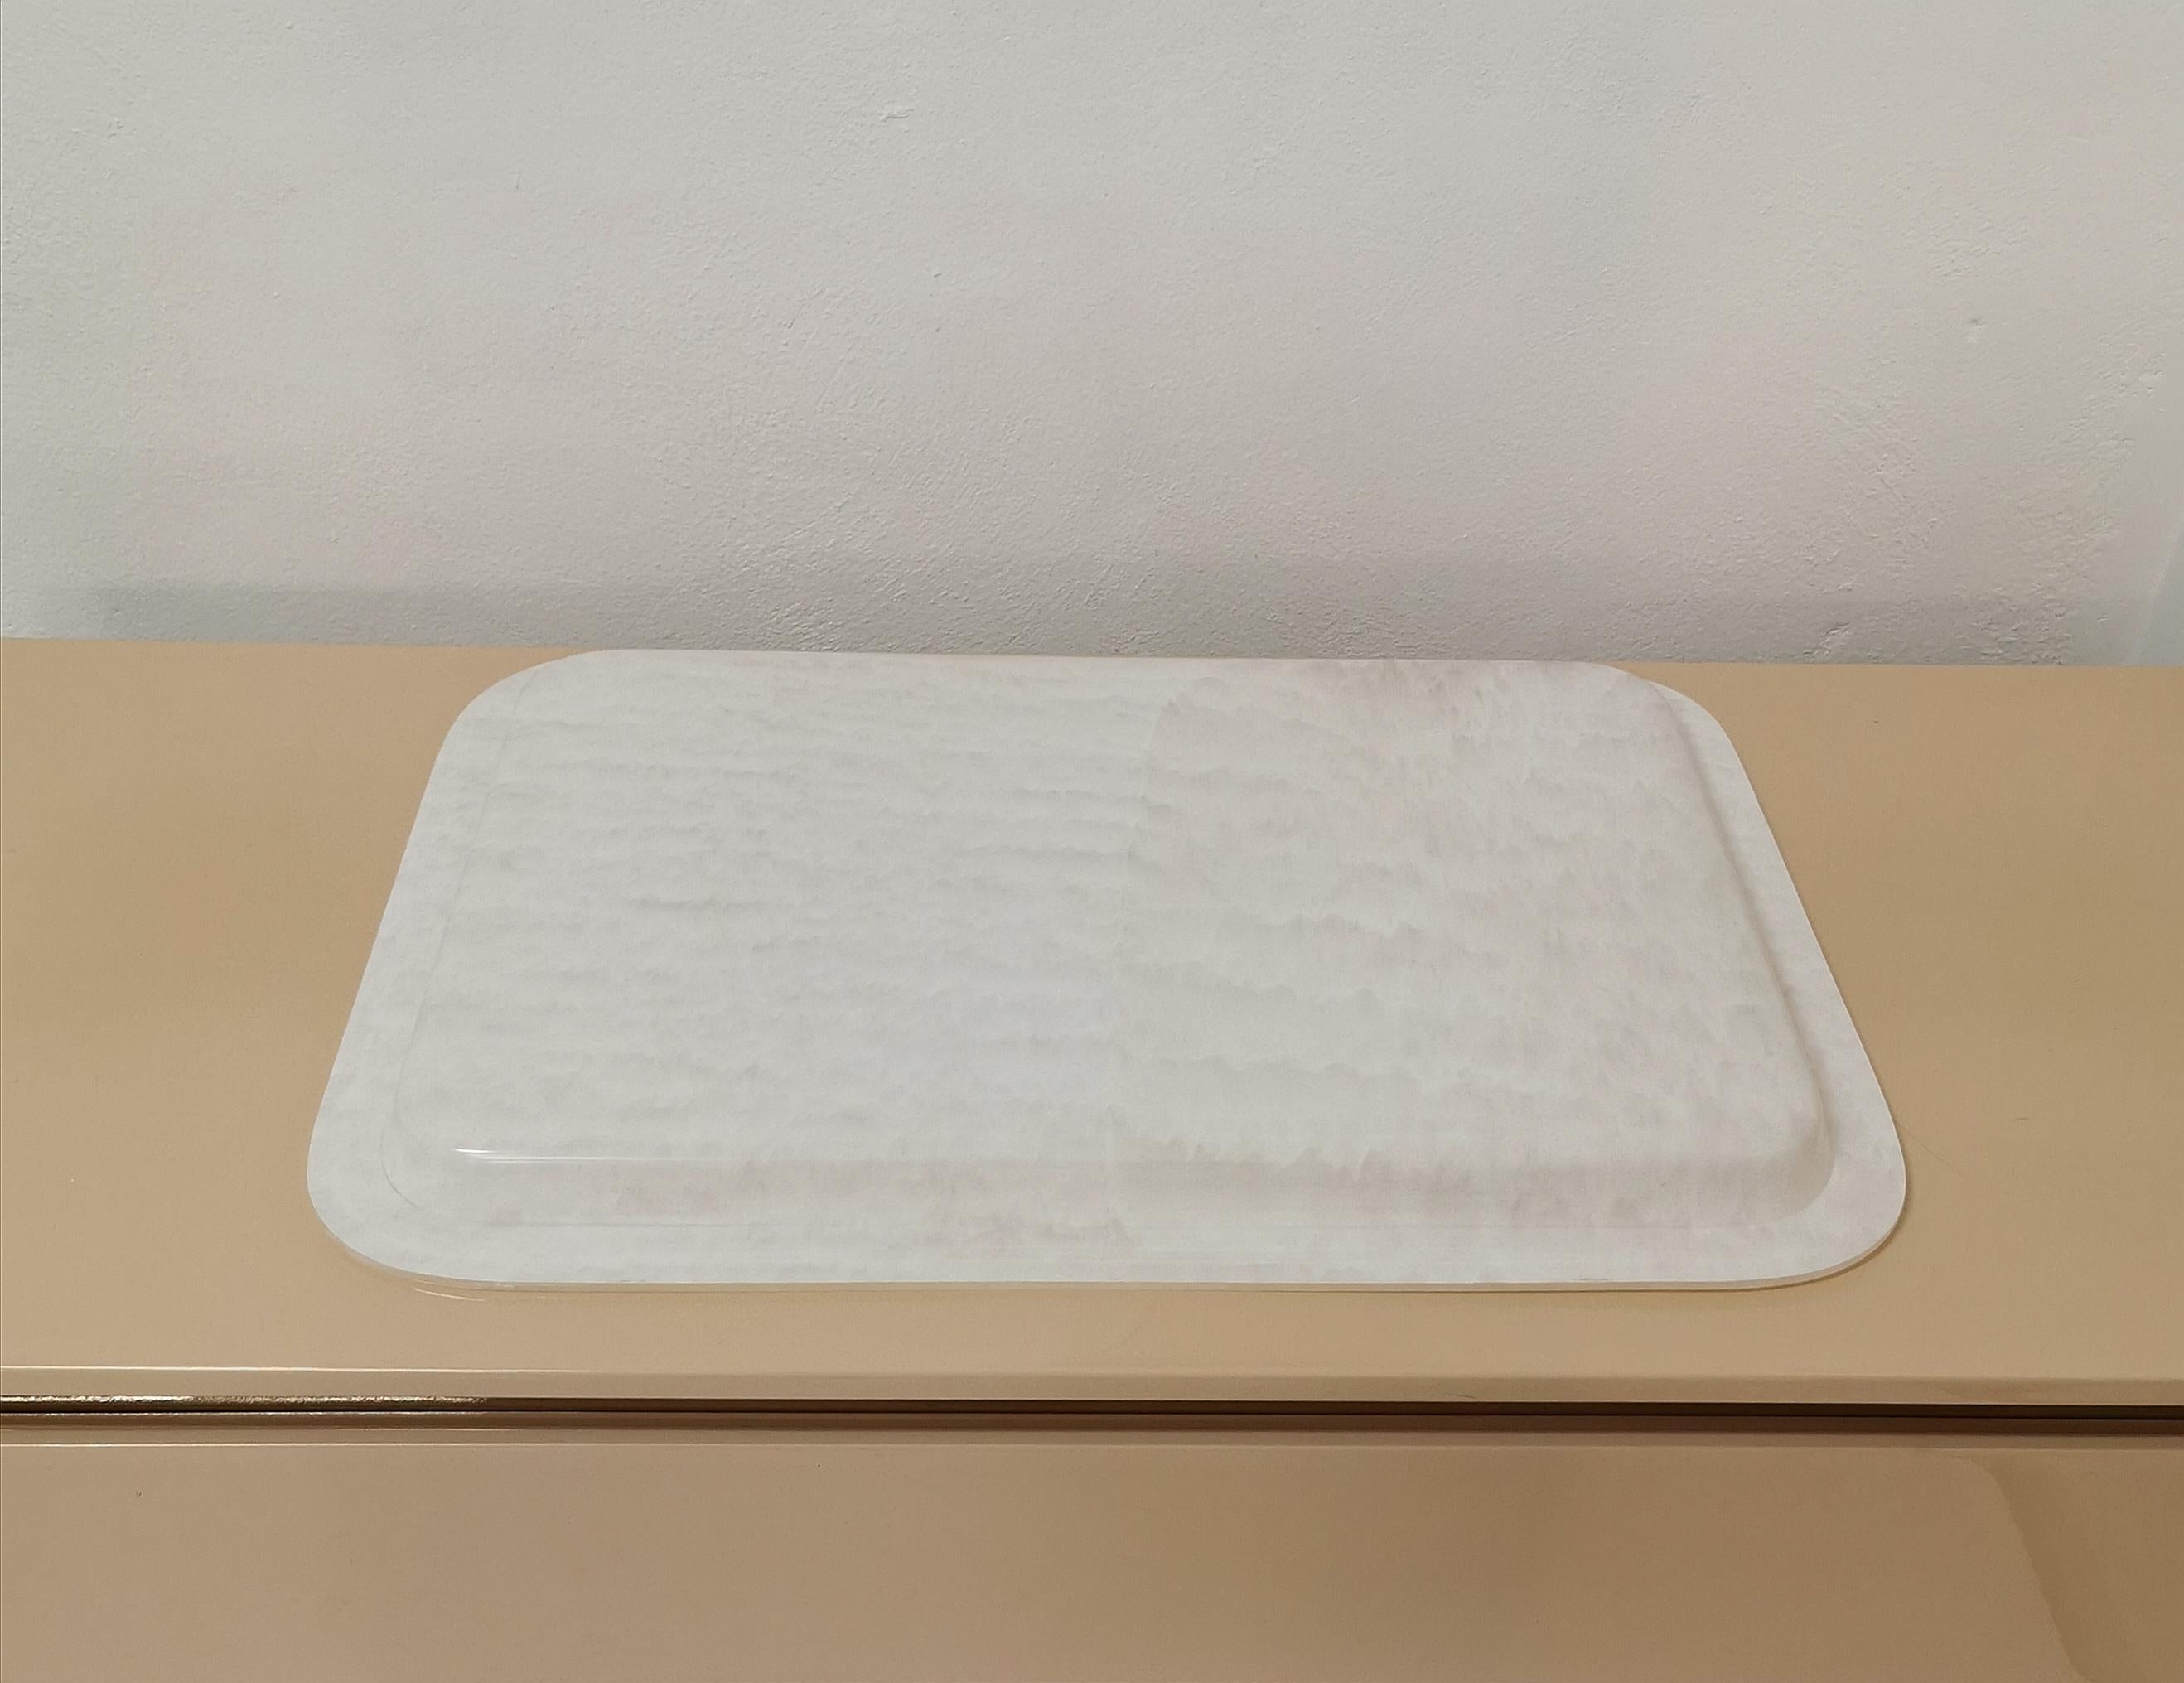 Midcentury Modern Tray Table Serving Piece Rectangular White Lucite Italy 1970s For Sale 4